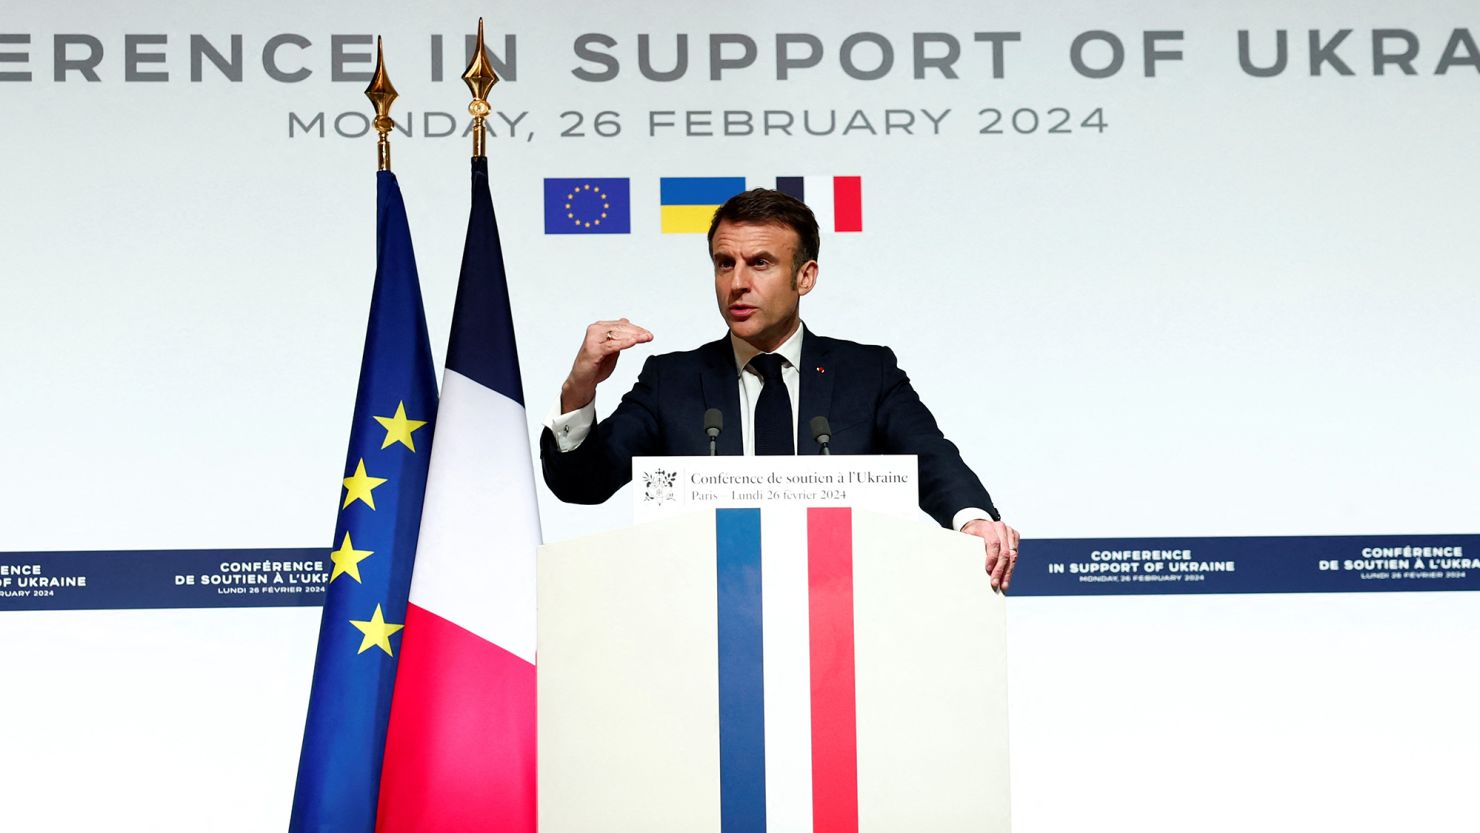 French President Emmanuel Macron speaks at a news conference at the end of the conference on Monday.